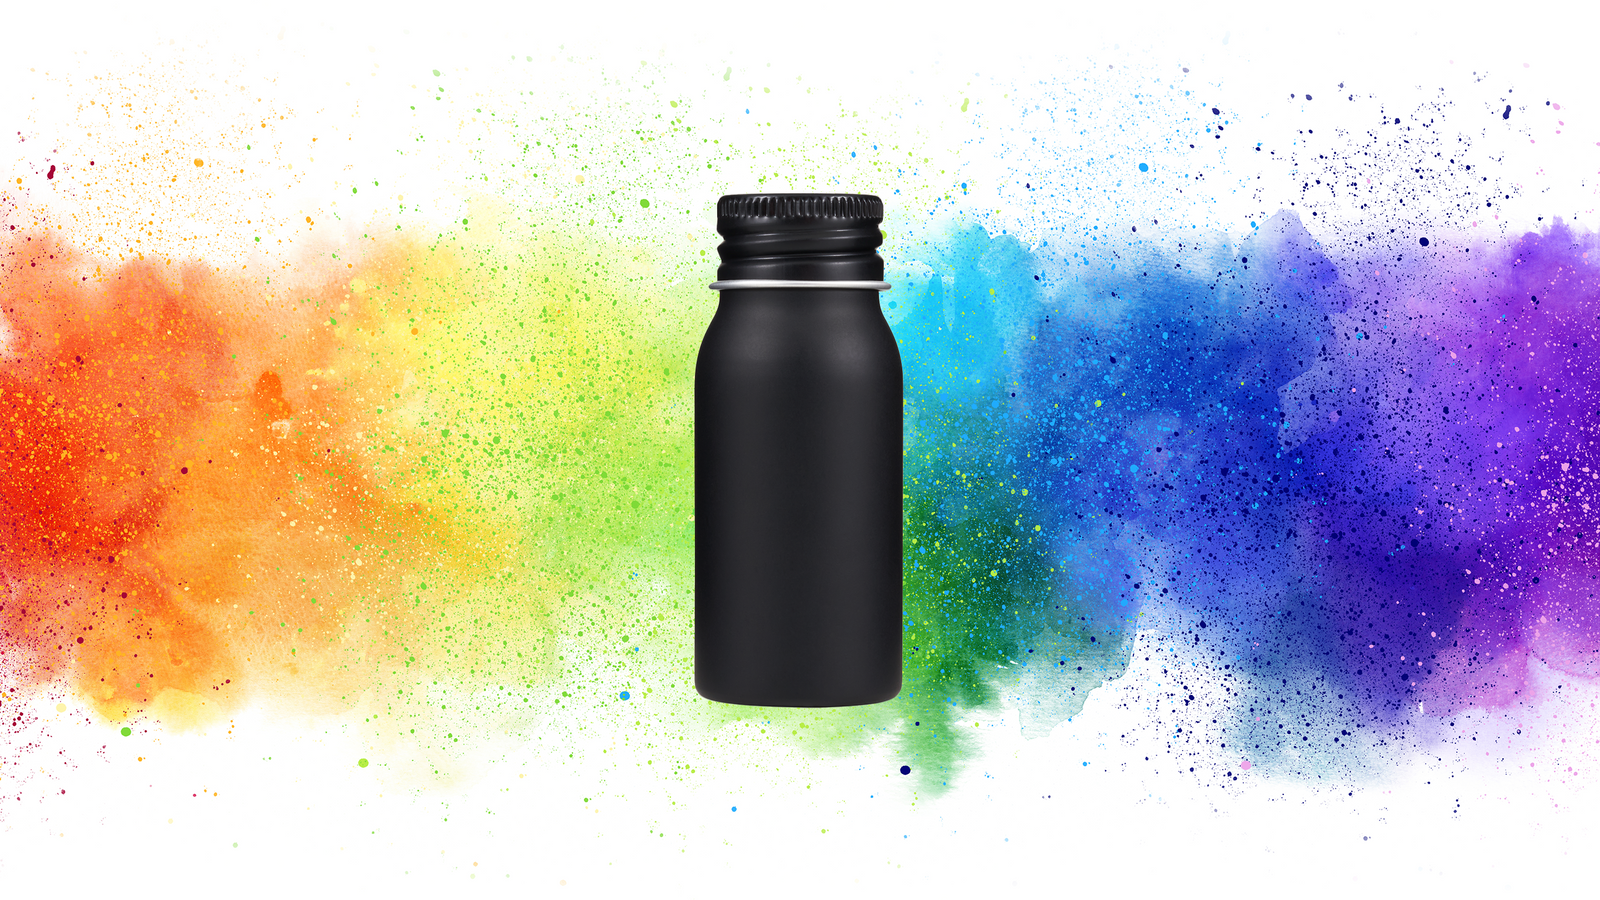 Black aluminium bottle packaging with multiple colours in background